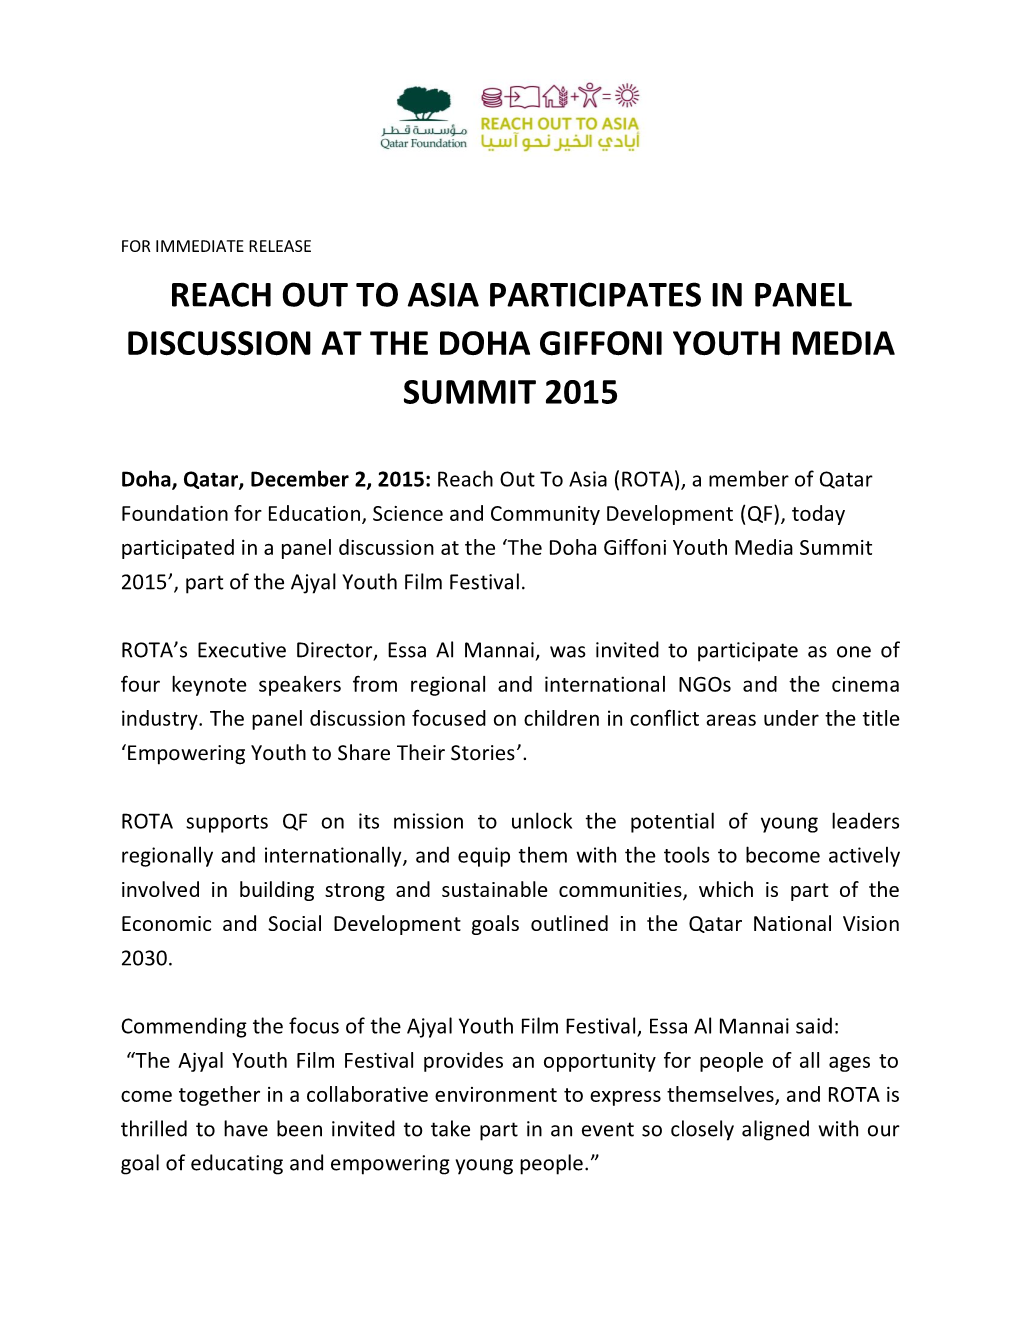 Reach out to Asia Participates in Panel Discussion at the Doha Giffoni Youth Media Summit 2015